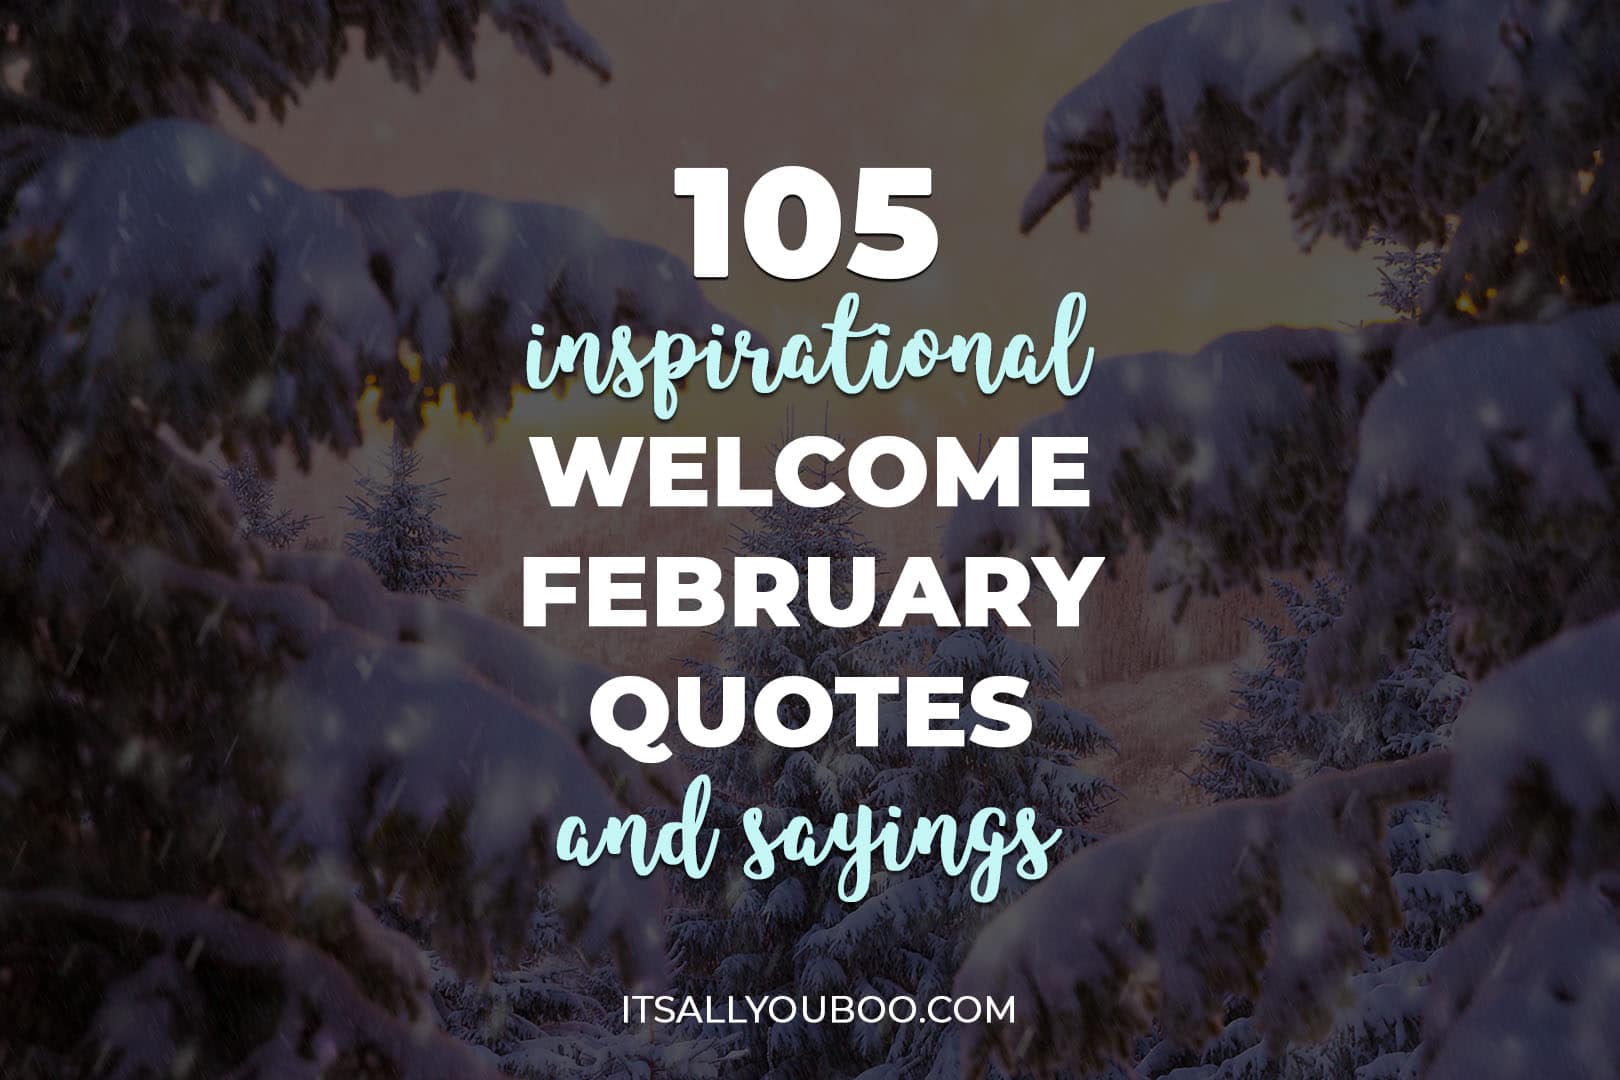 105 Inspirational Welcome February Quotes and Sayings